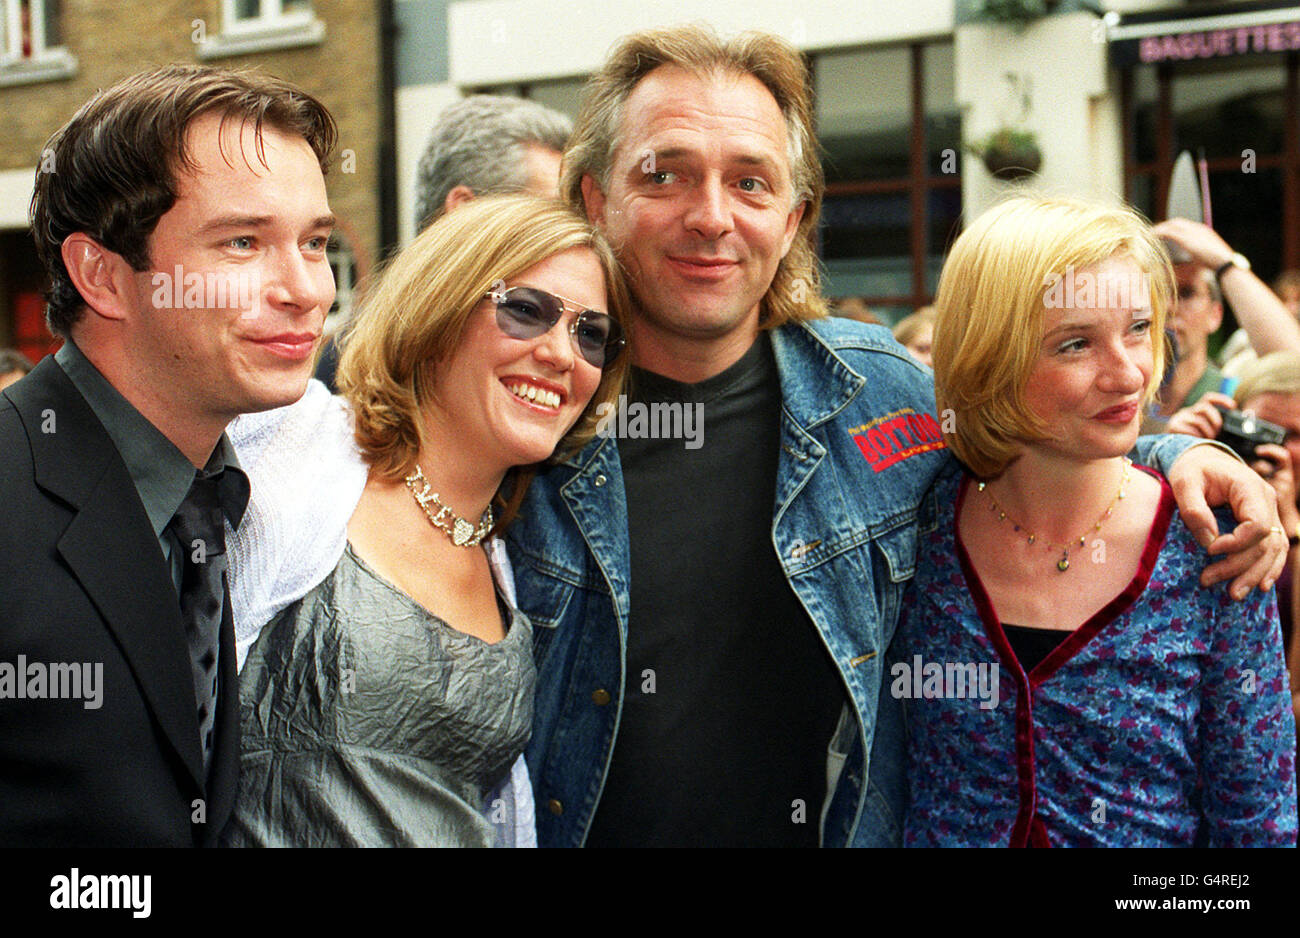 L-R: Boyzone's Stephen Gately, Catatonia's Cerys Matthews, actor Rik Mayall and actress Jane Horrocks at the New London Theatre, Dury Lane, London, for the launch of ITV television's new animated adventure series of Watership Down. * Cerys Matthews is to sing a song on the album accompanying the series, and Stephen Gately voices the character of Blackavar and has re-recorded 'Bright Eyes'. The programme will be broadcast on the Children's ITV Network in September 1999, bringing the classic tale to a new generation. Stock Photo